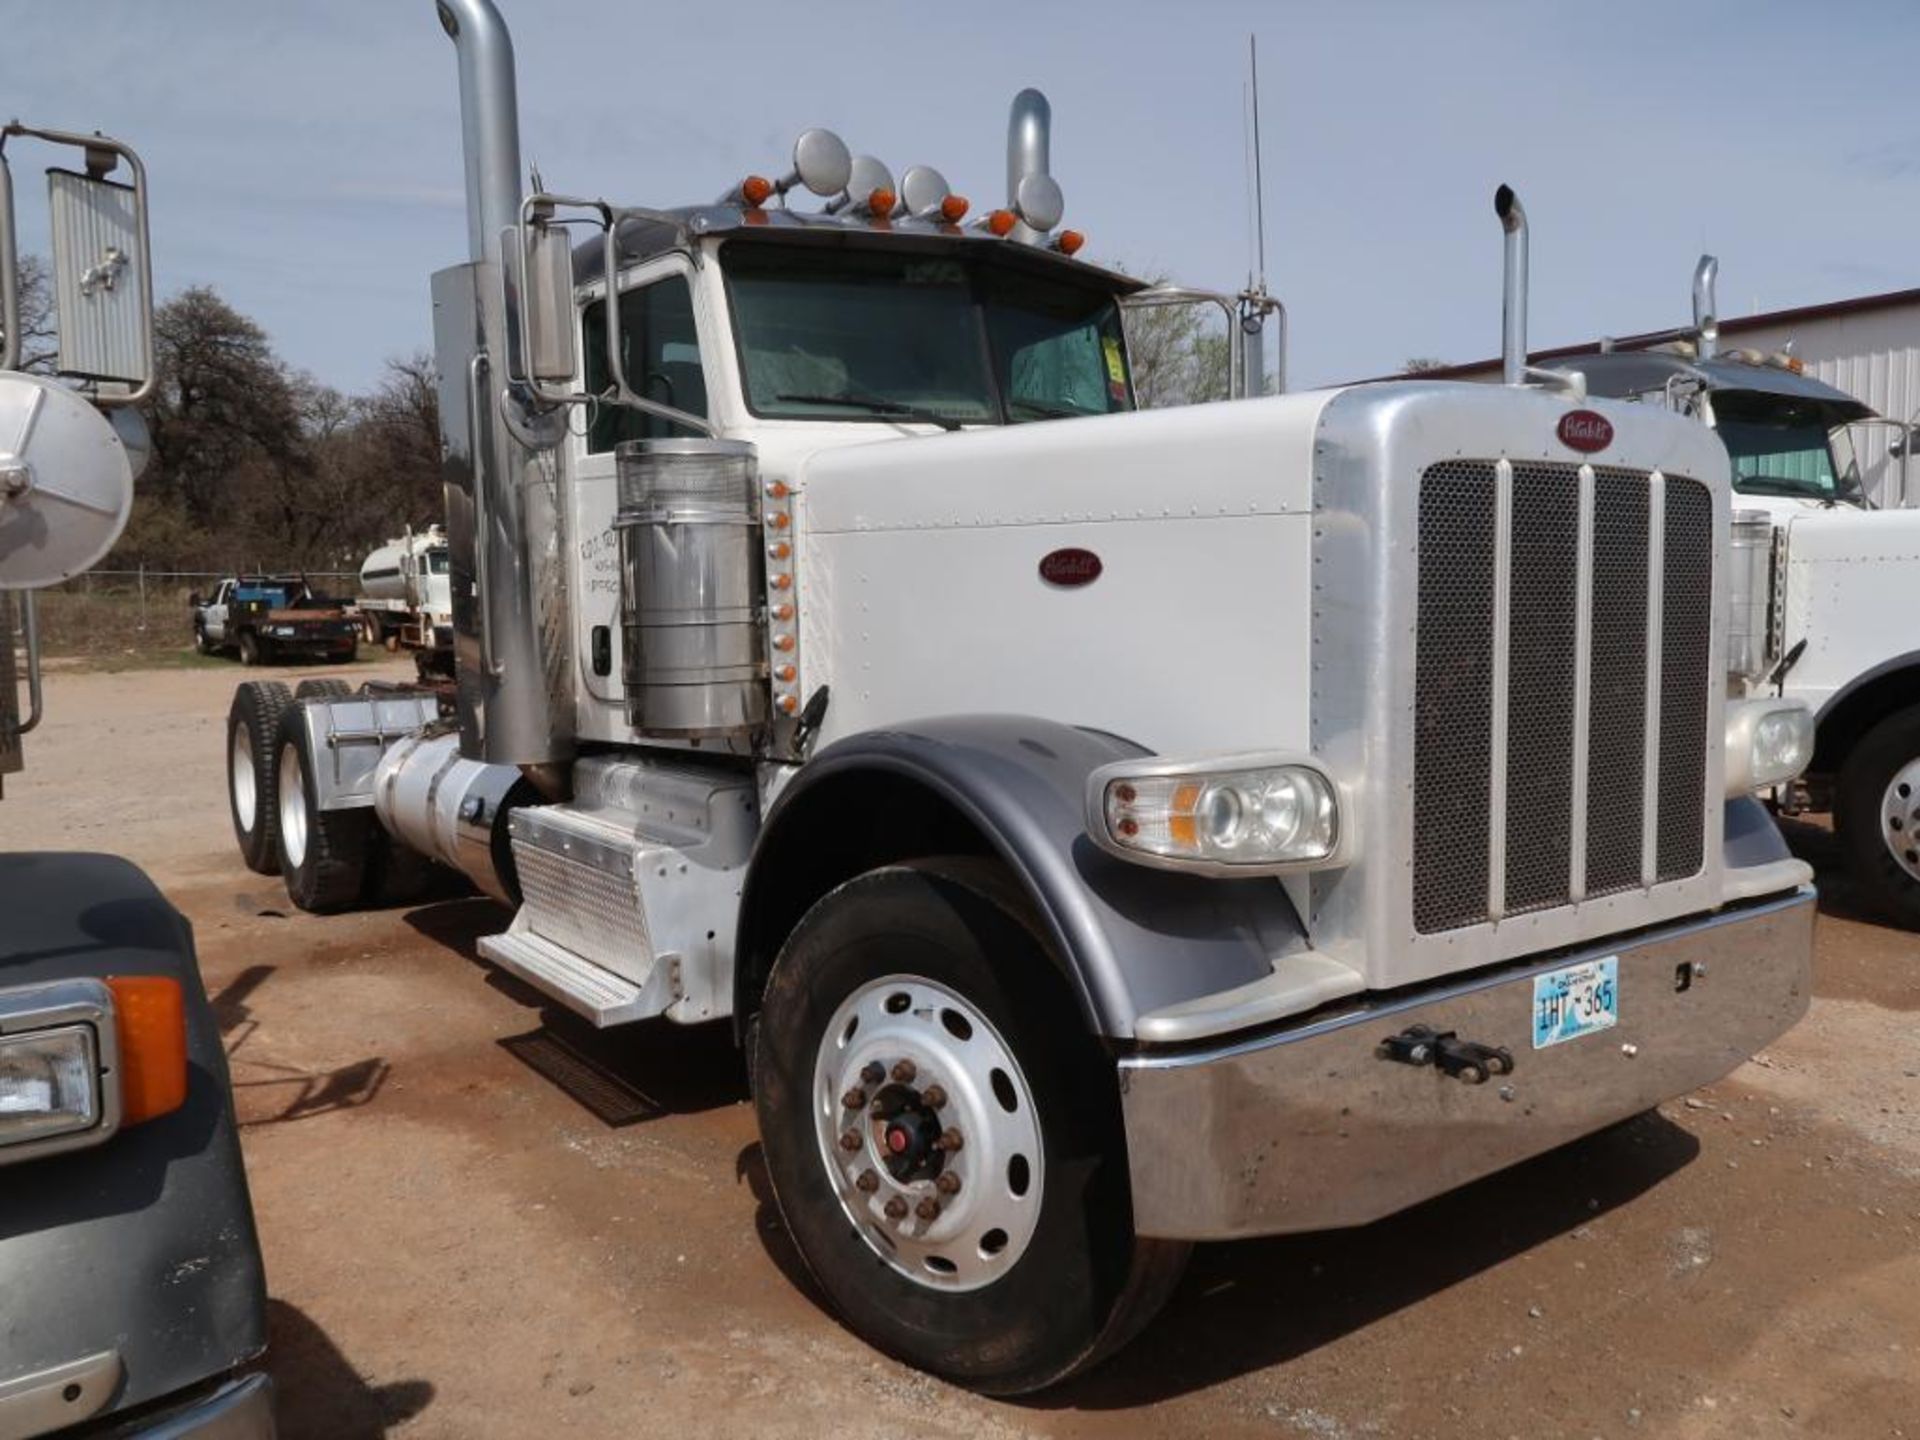 2013 Peterbilt Model 389, Tandem Axle Conventional Tractor, 14.9L L6 Diesel, Complete w/ Challenger - Image 2 of 8